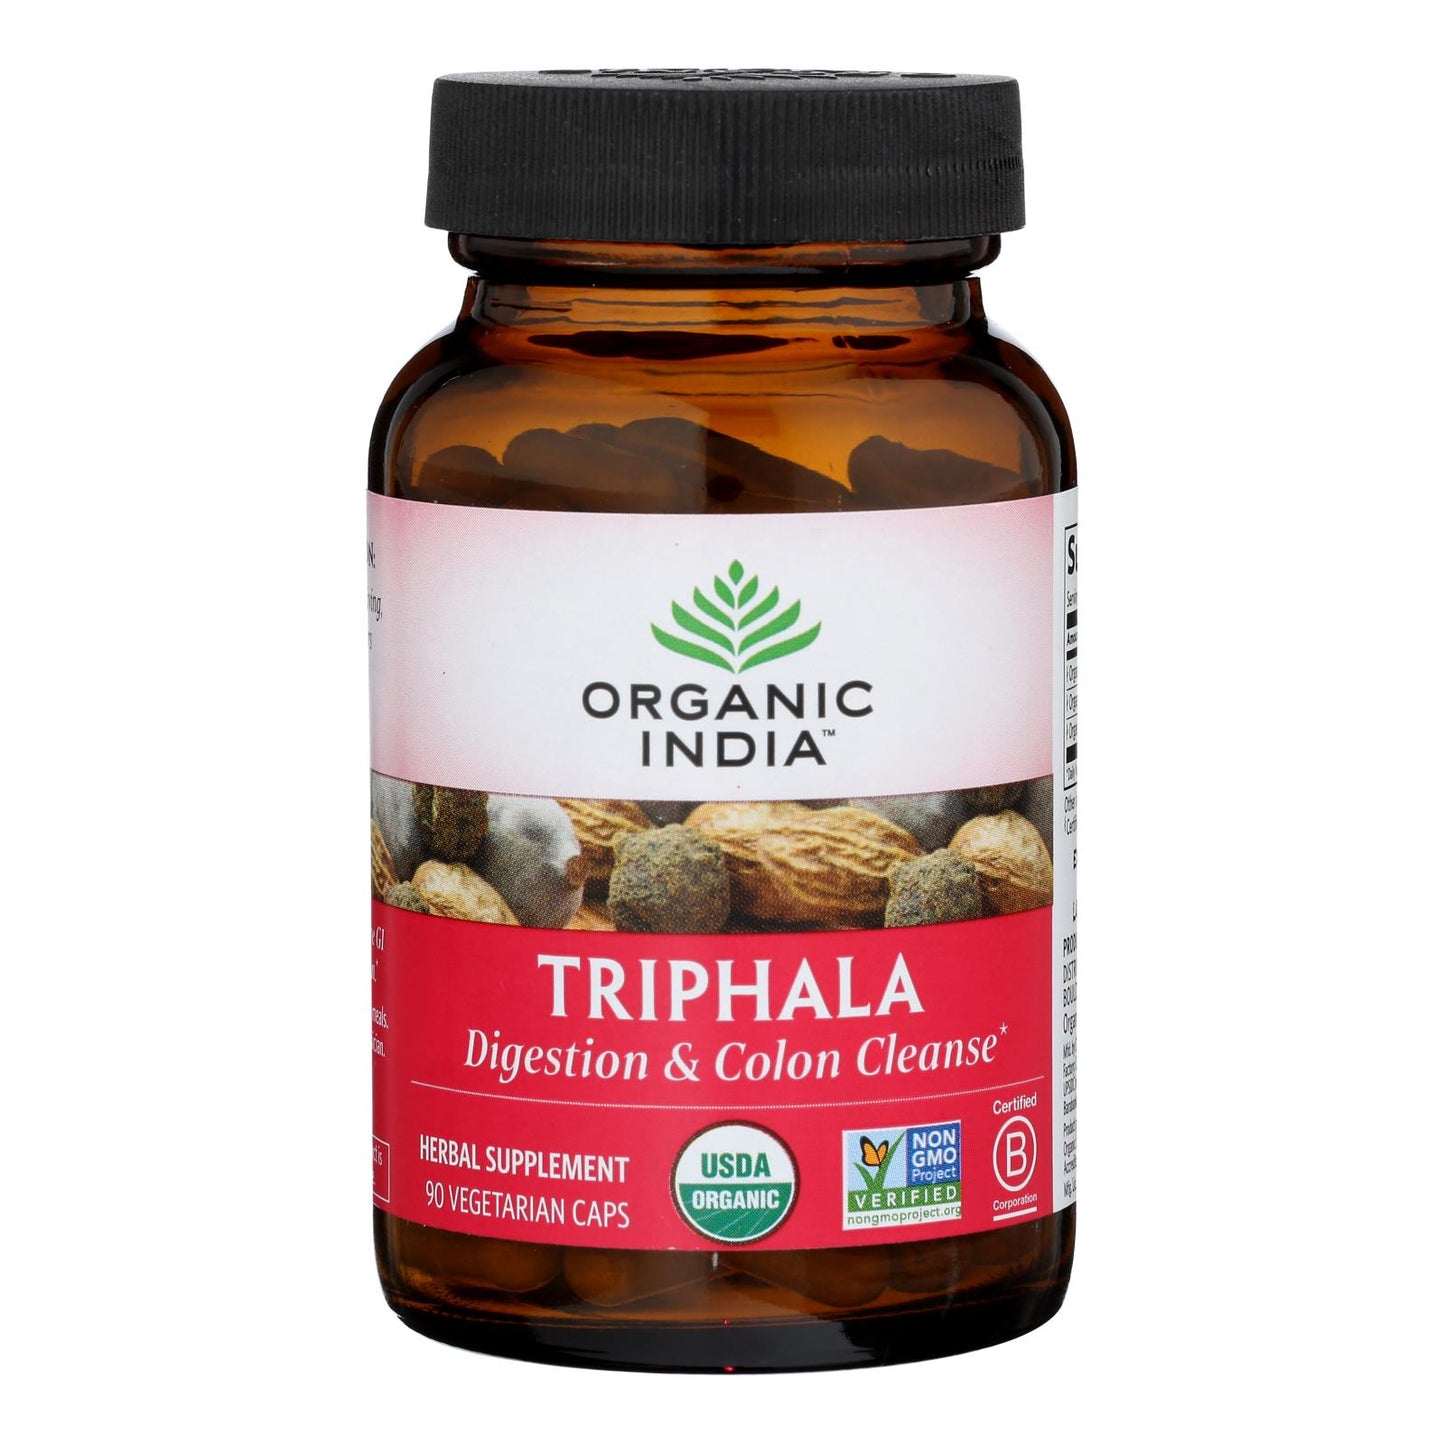 Triphala for Digestion and Colon Cleanse | Organic India